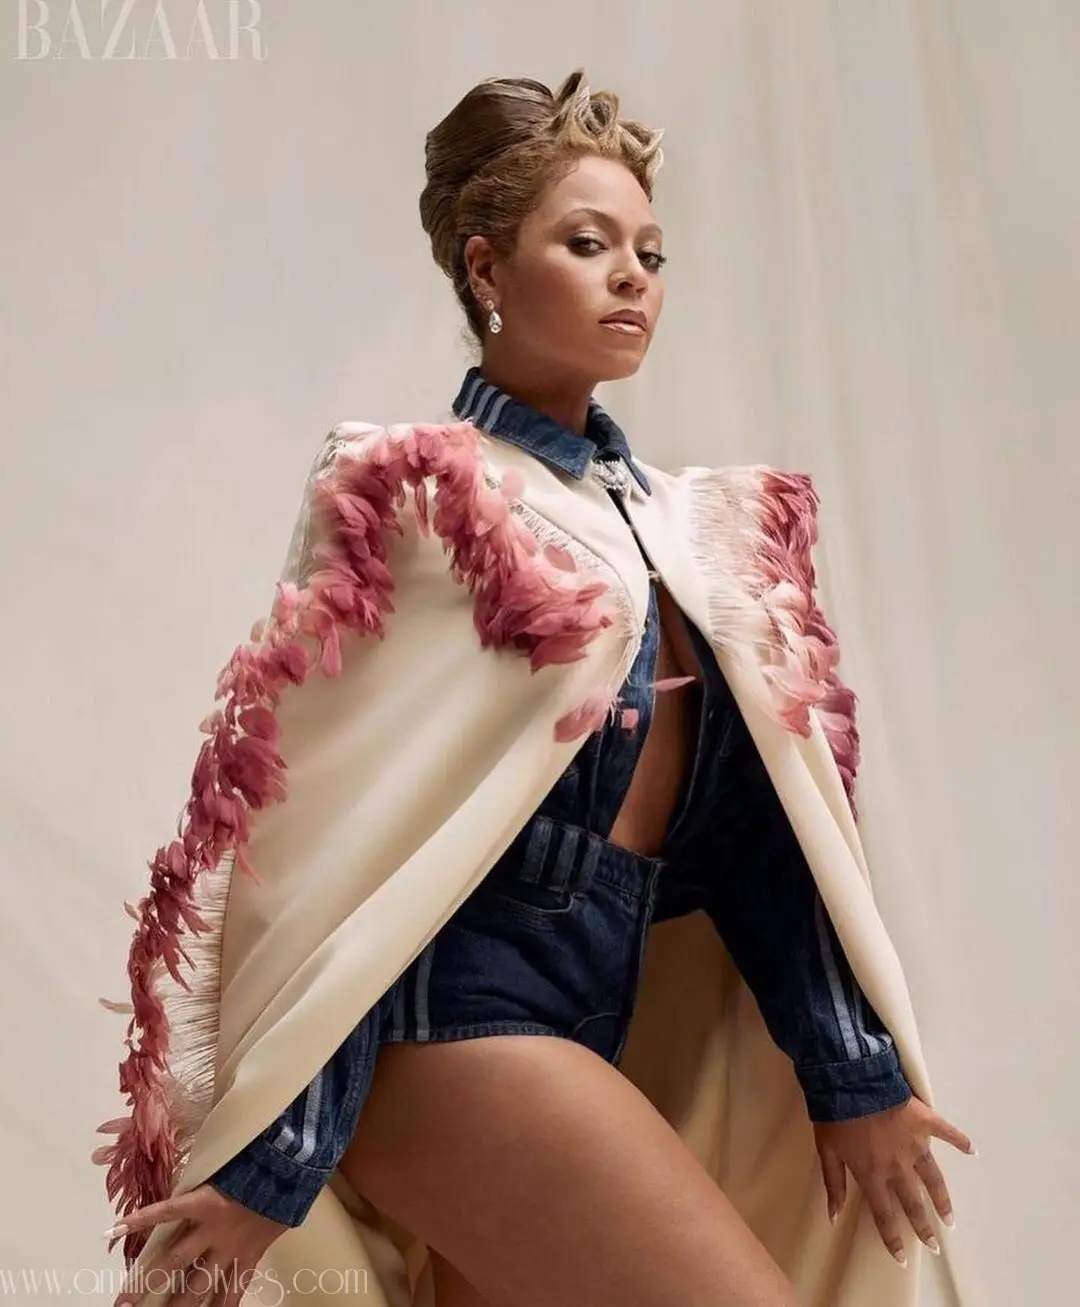 Beyonce Covers Harper's Bazaar "The Icon Issue"